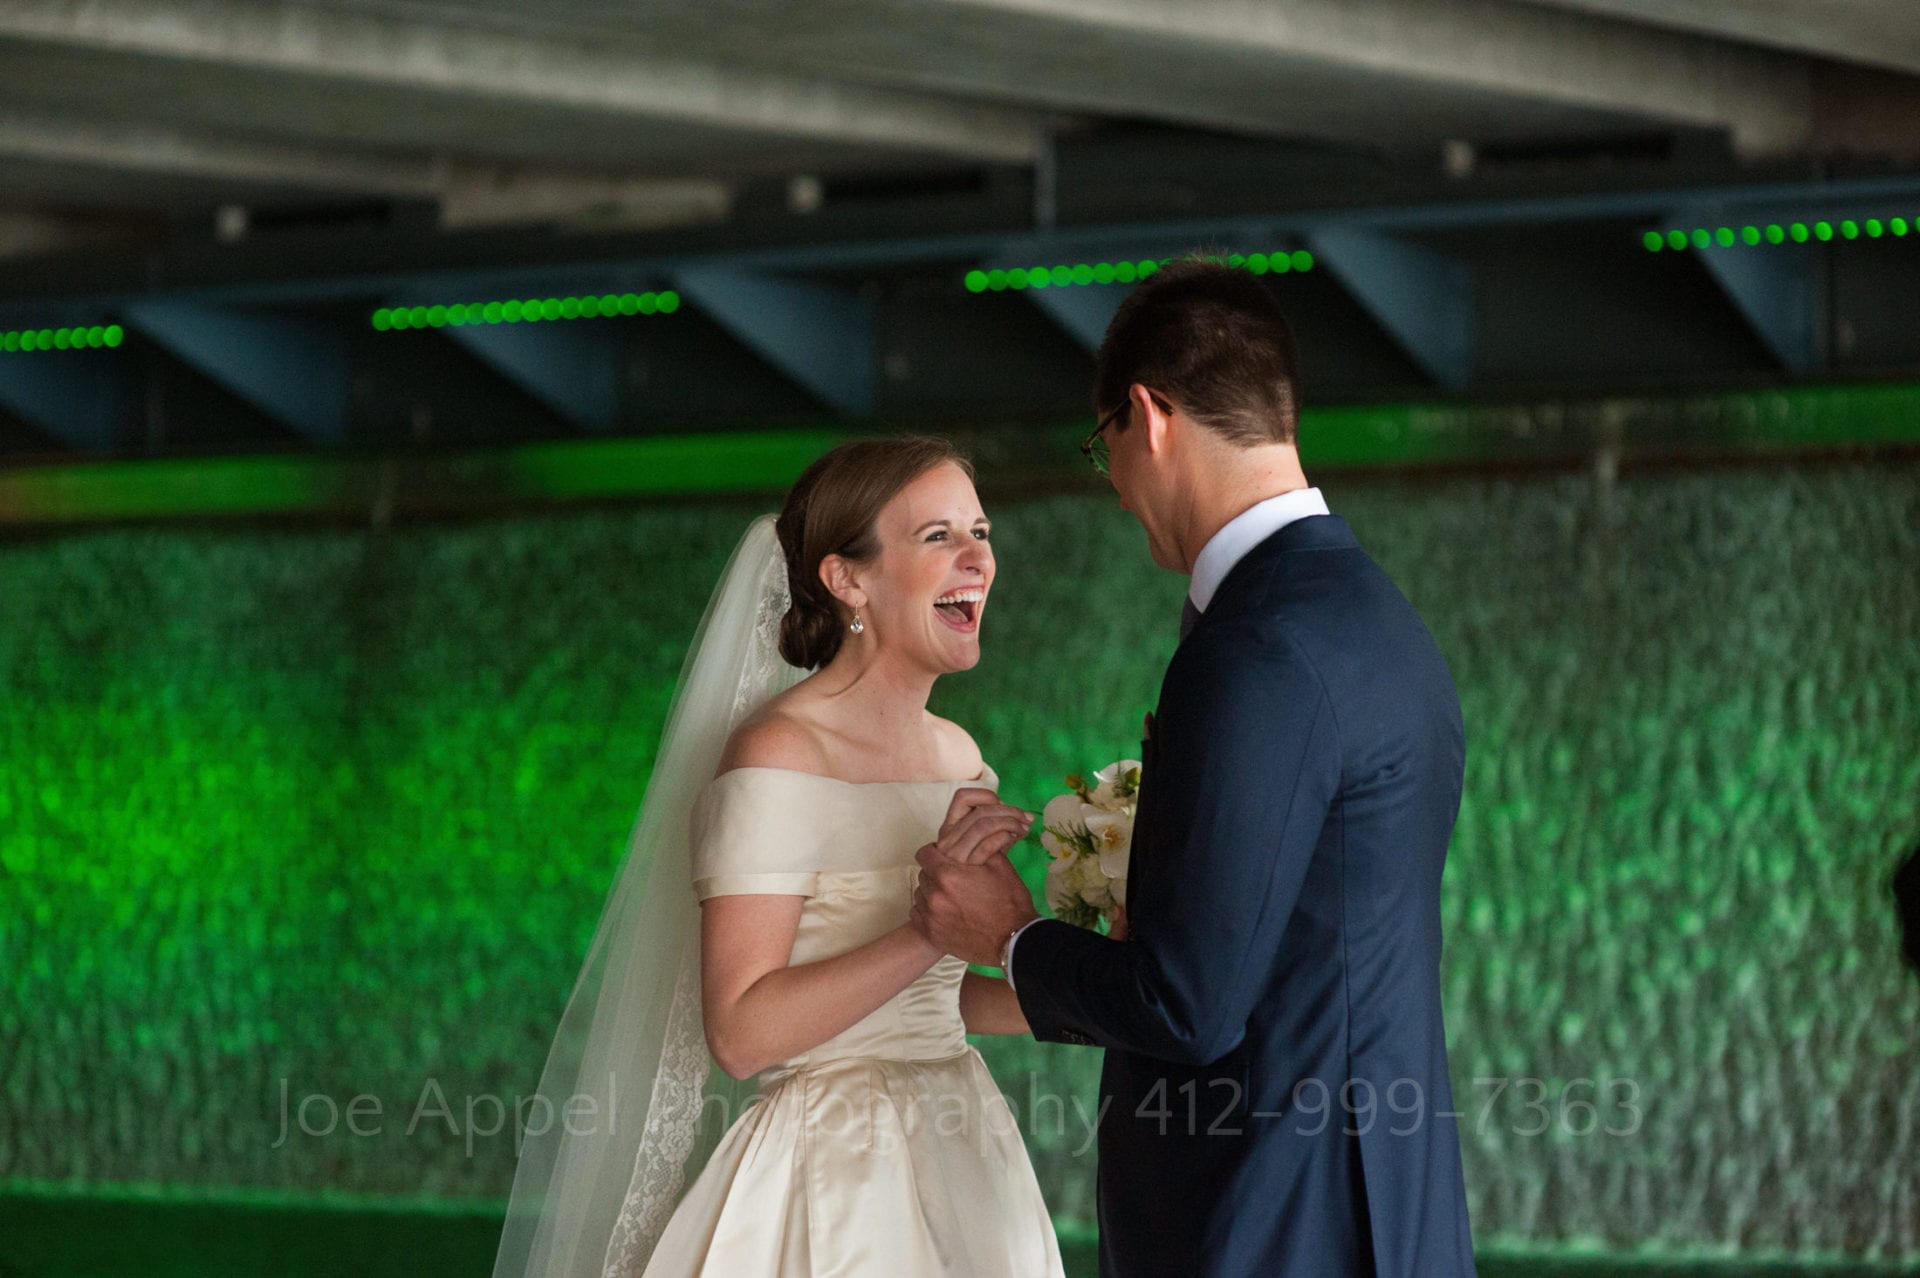 A bride in a white silk dress and veil laughs as she and her groom hold hands while facing each other during their first look. There is a green-lit waterfall behind them.